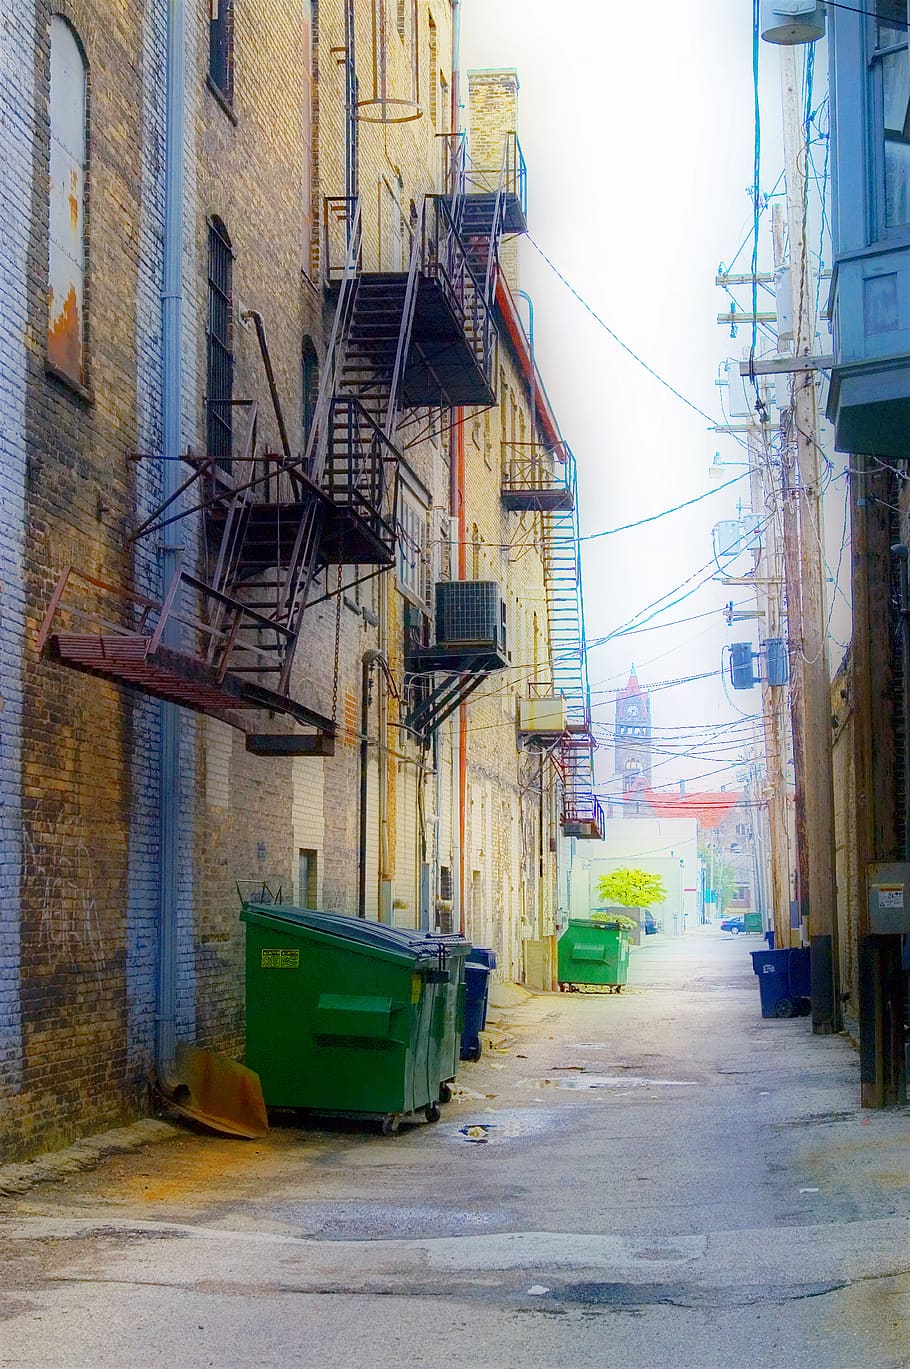 ally, dumpster, fire escape, buildings, alleyway, brick, city, downtown, electrical wires, garbage